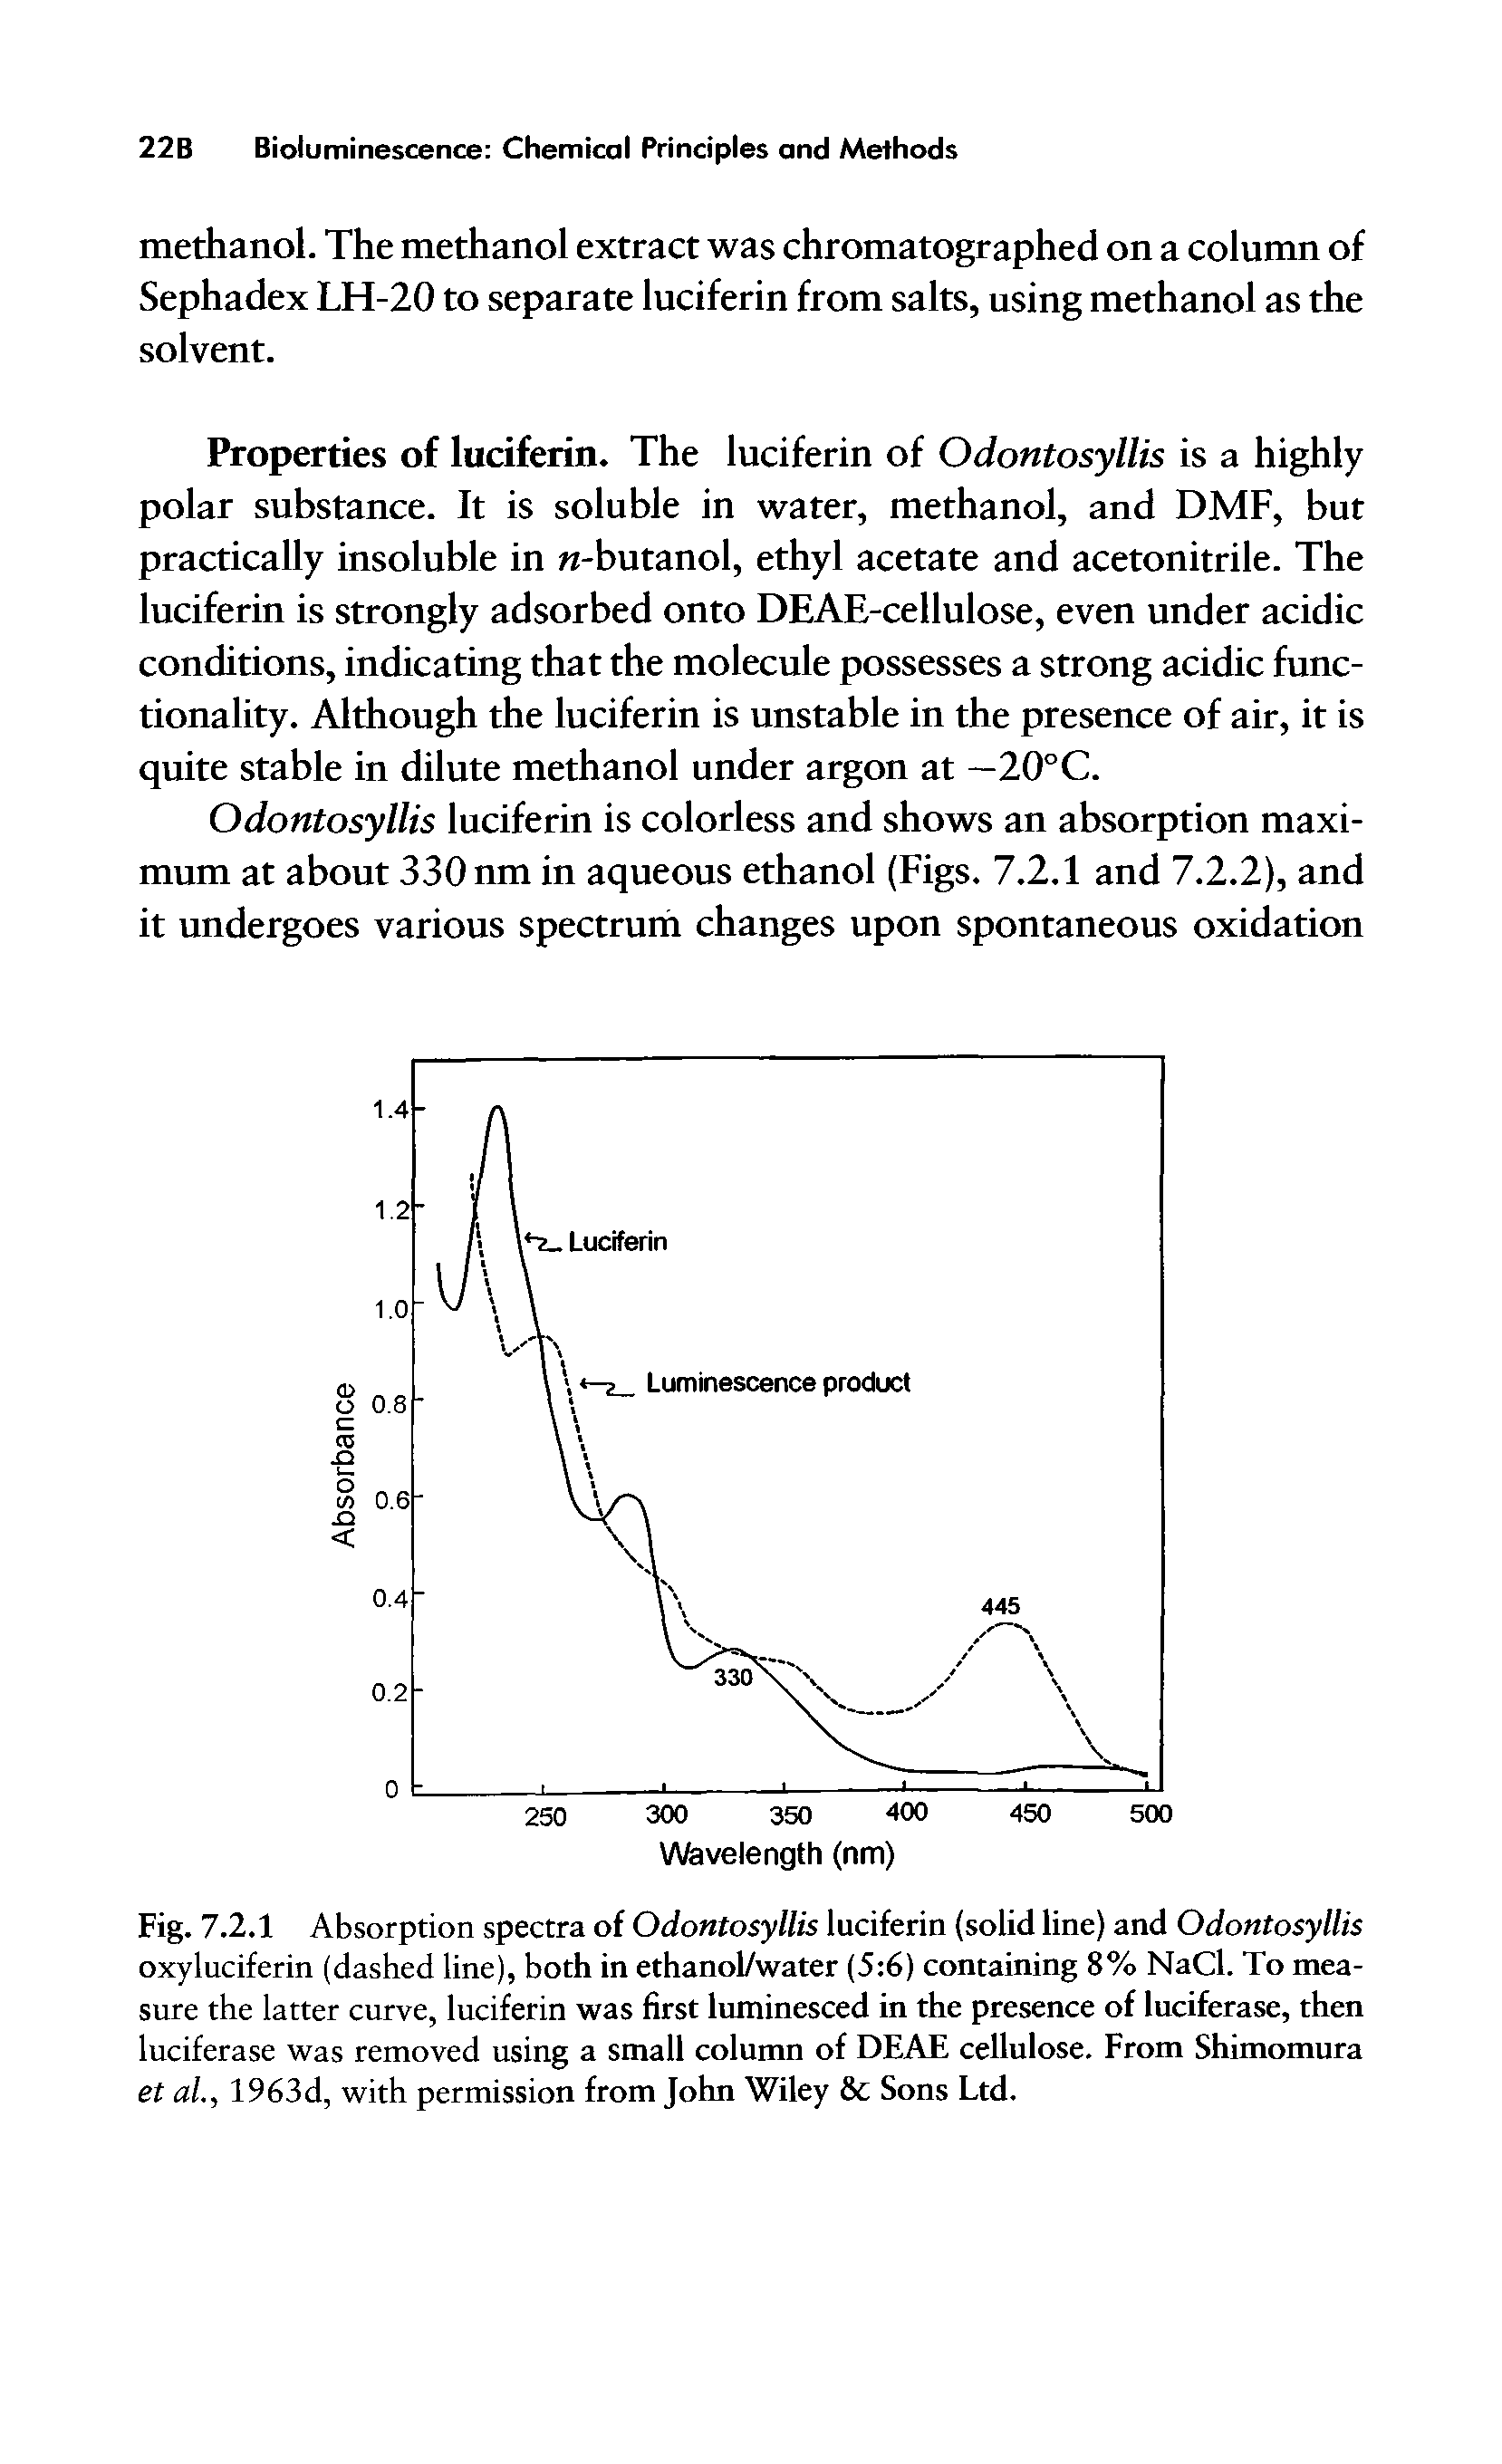 Fig. 7.2.1 Absorption spectra of Odontosyllis luciferin (solid line) and Odontosyllis oxyluciferin (dashed line), both in ethanol/water (5 6) containing 8% NaCl. To measure the latter curve, luciferin was first luminesced in the presence of luciferase, then luciferase was removed using a small column of DEAE cellulose. From Shimomura et al, 1963d, with permission from John Wiley Sons Ltd.